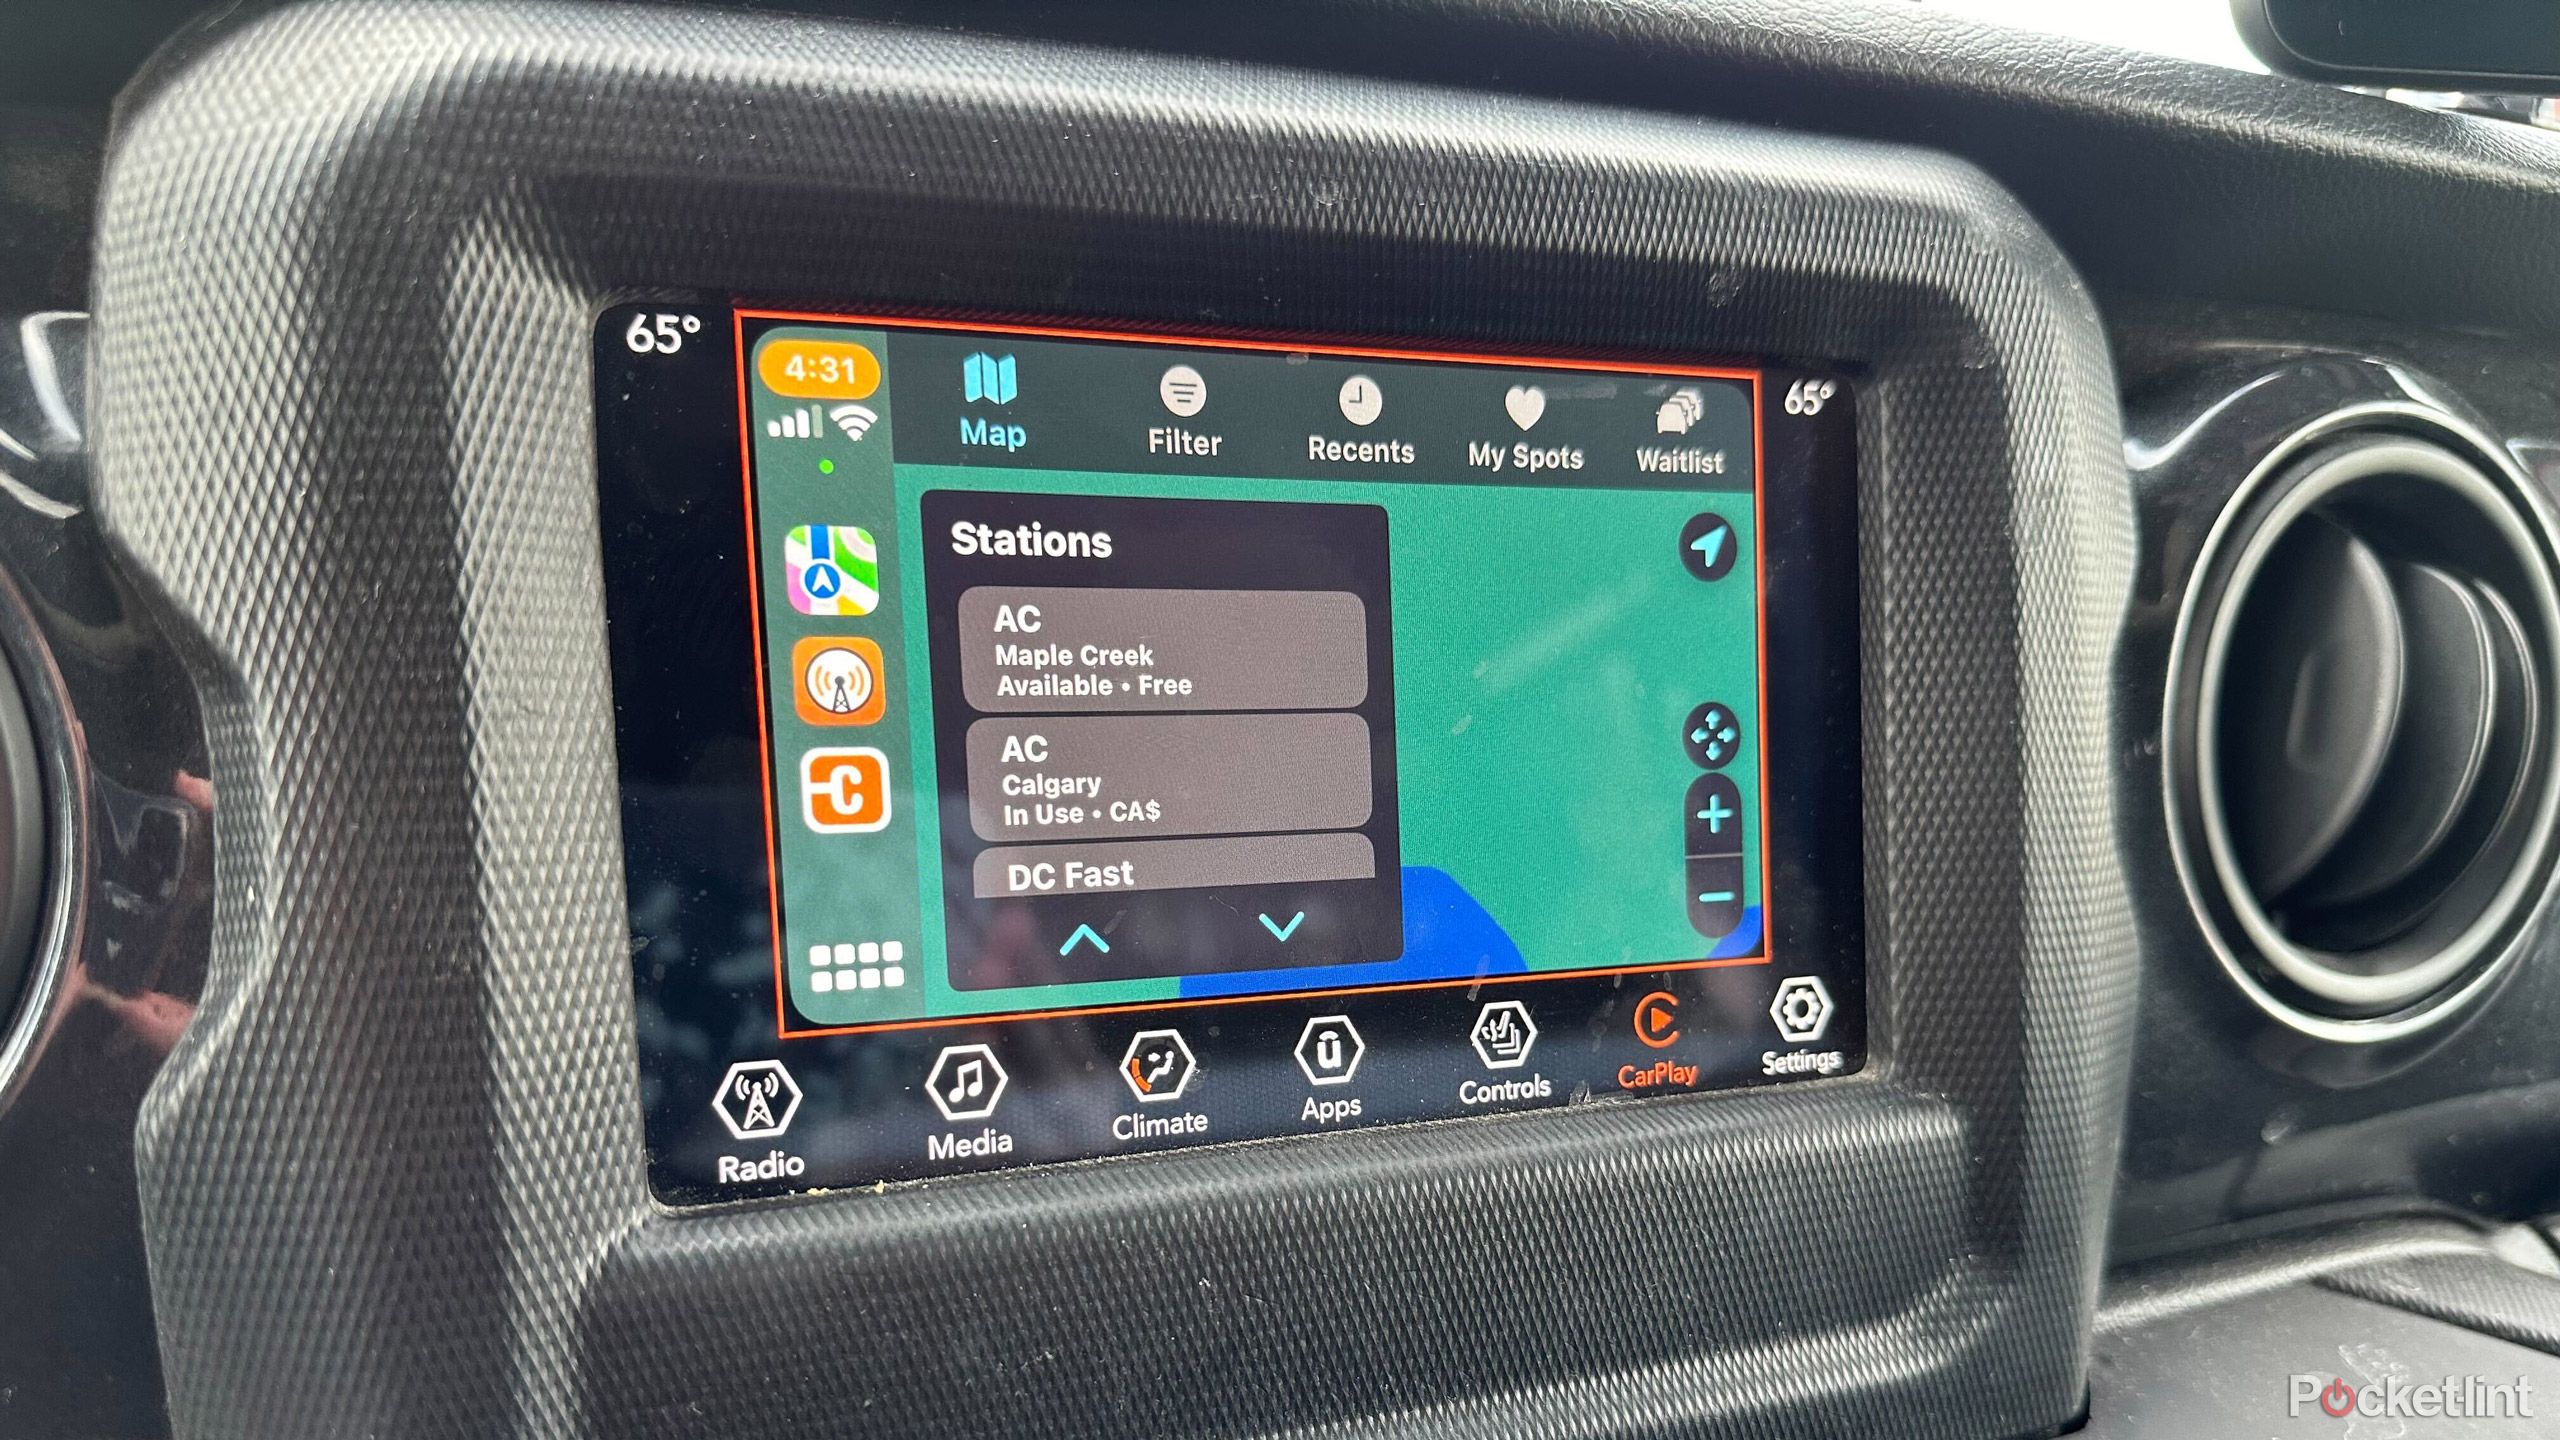 ChargePoint app on CarPlay display